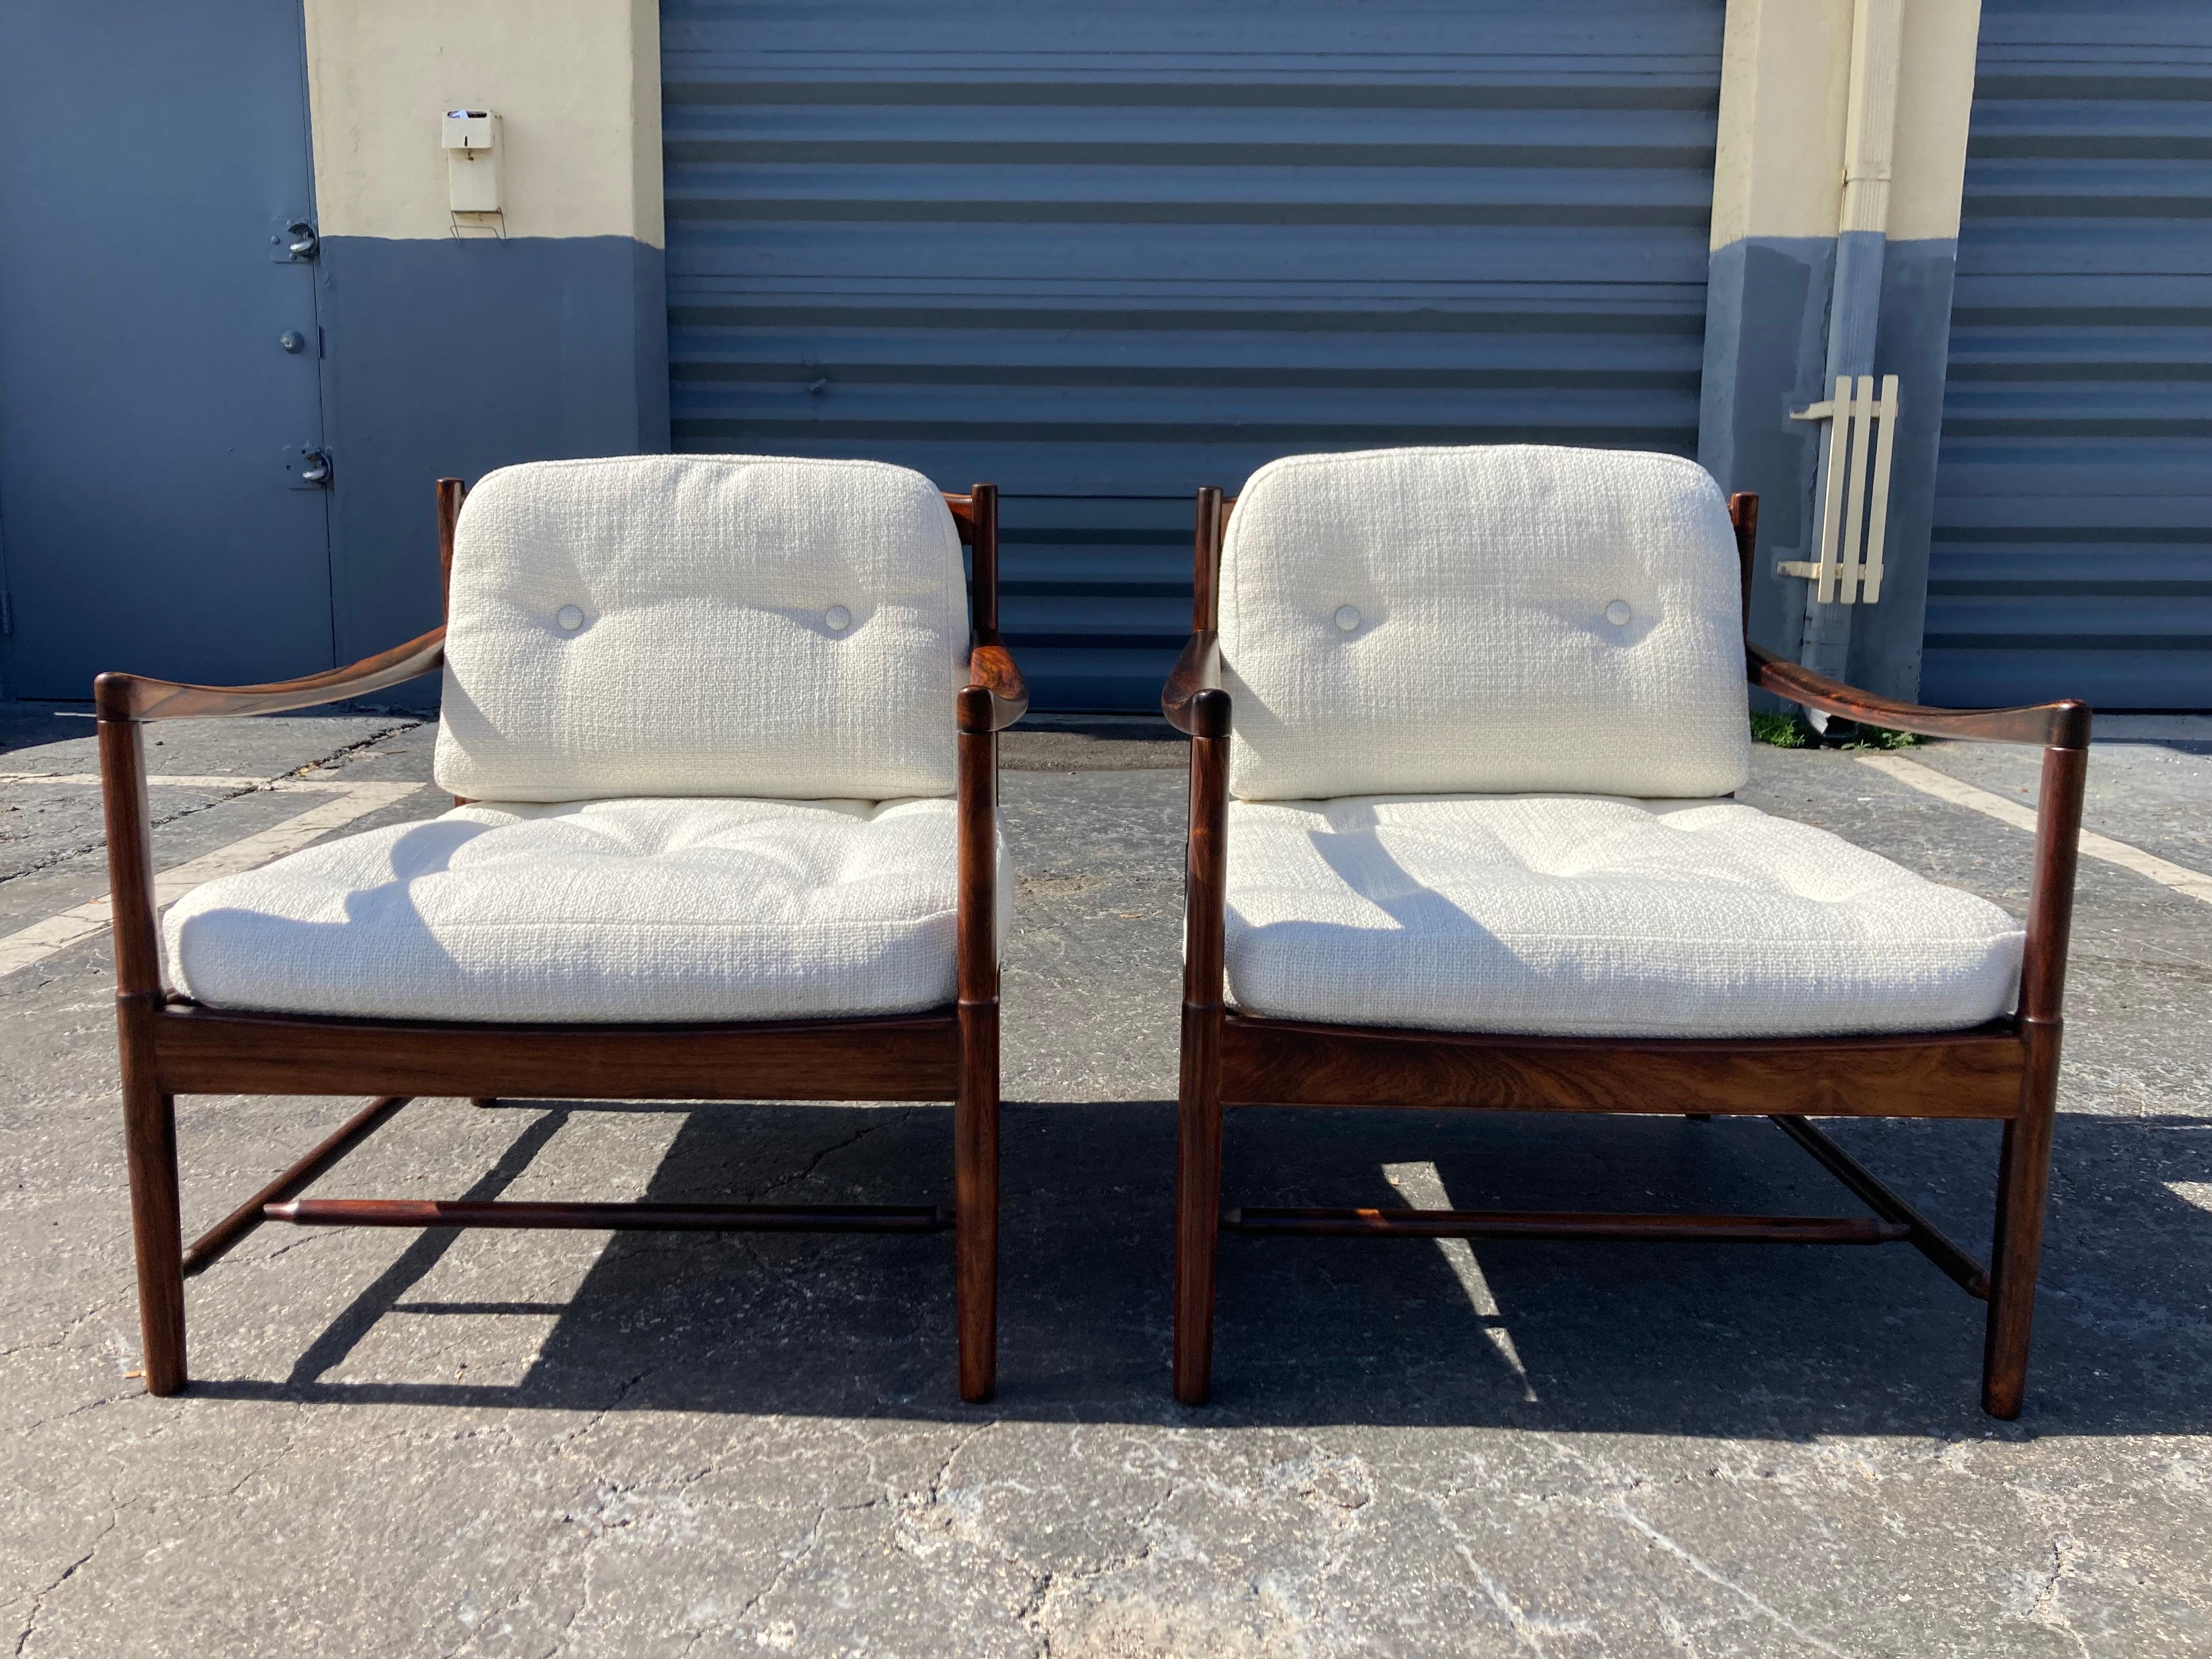 Pair of Rosewood Lounge Chairs Attributed to Kofod Larsen, Danish Modern For Sale 9